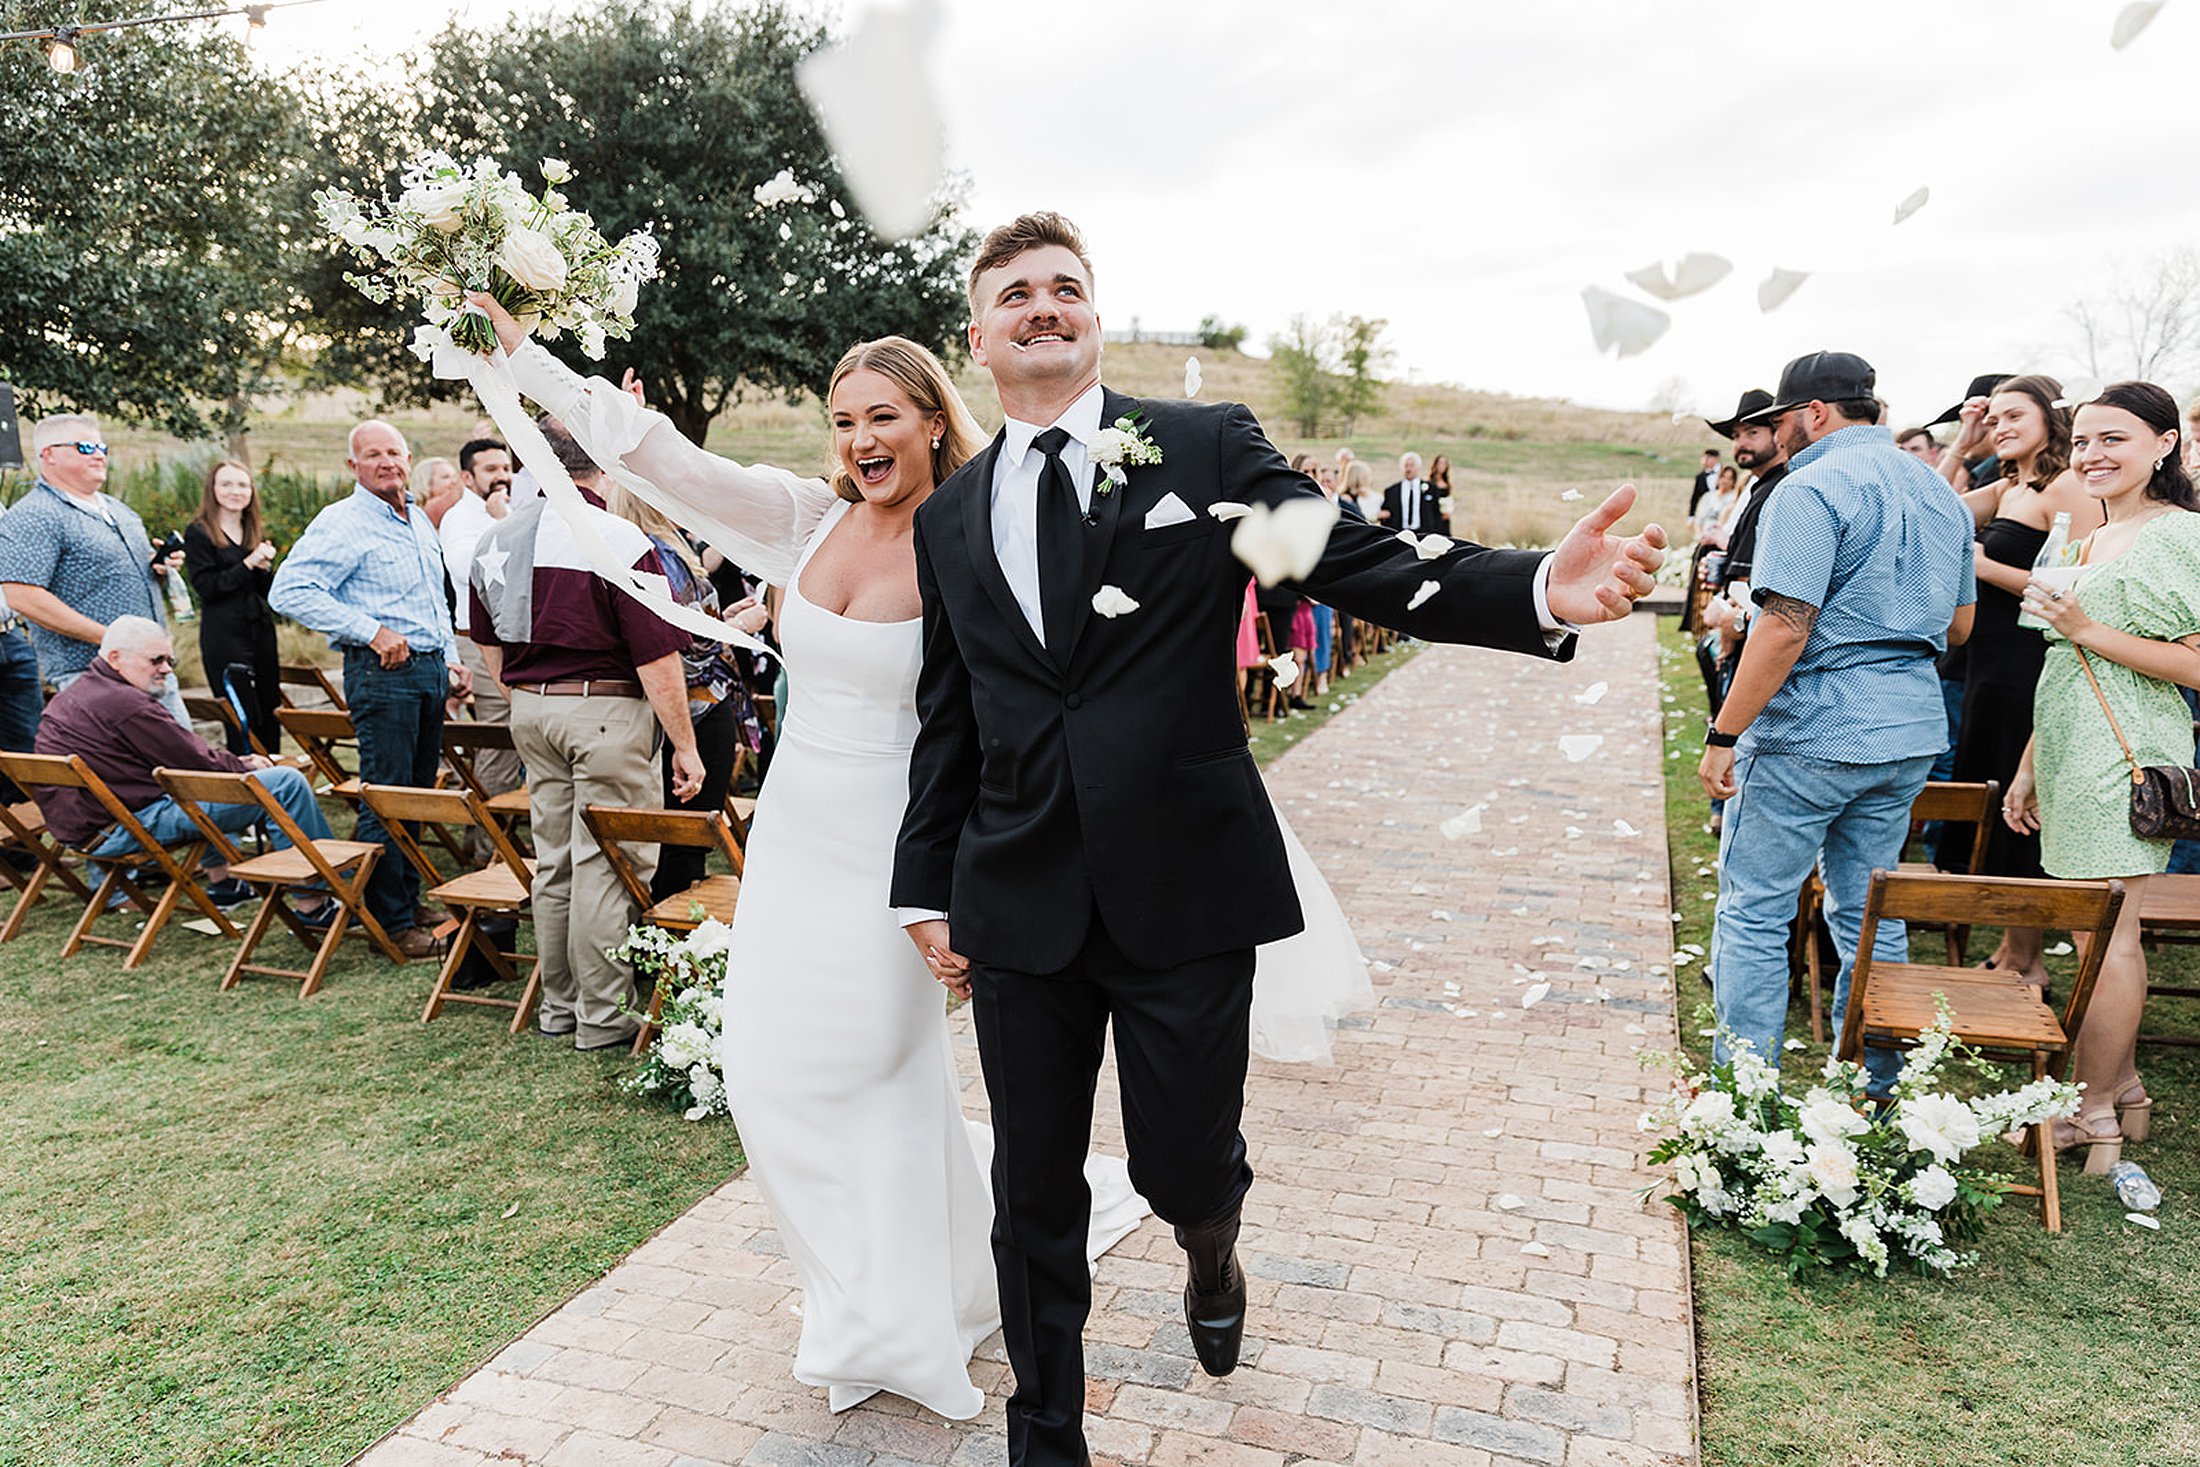 A newlywed couple walks down the aisle smiling and holding hands at Two Wishes Ranch, as guests toss flower petals in celebration.